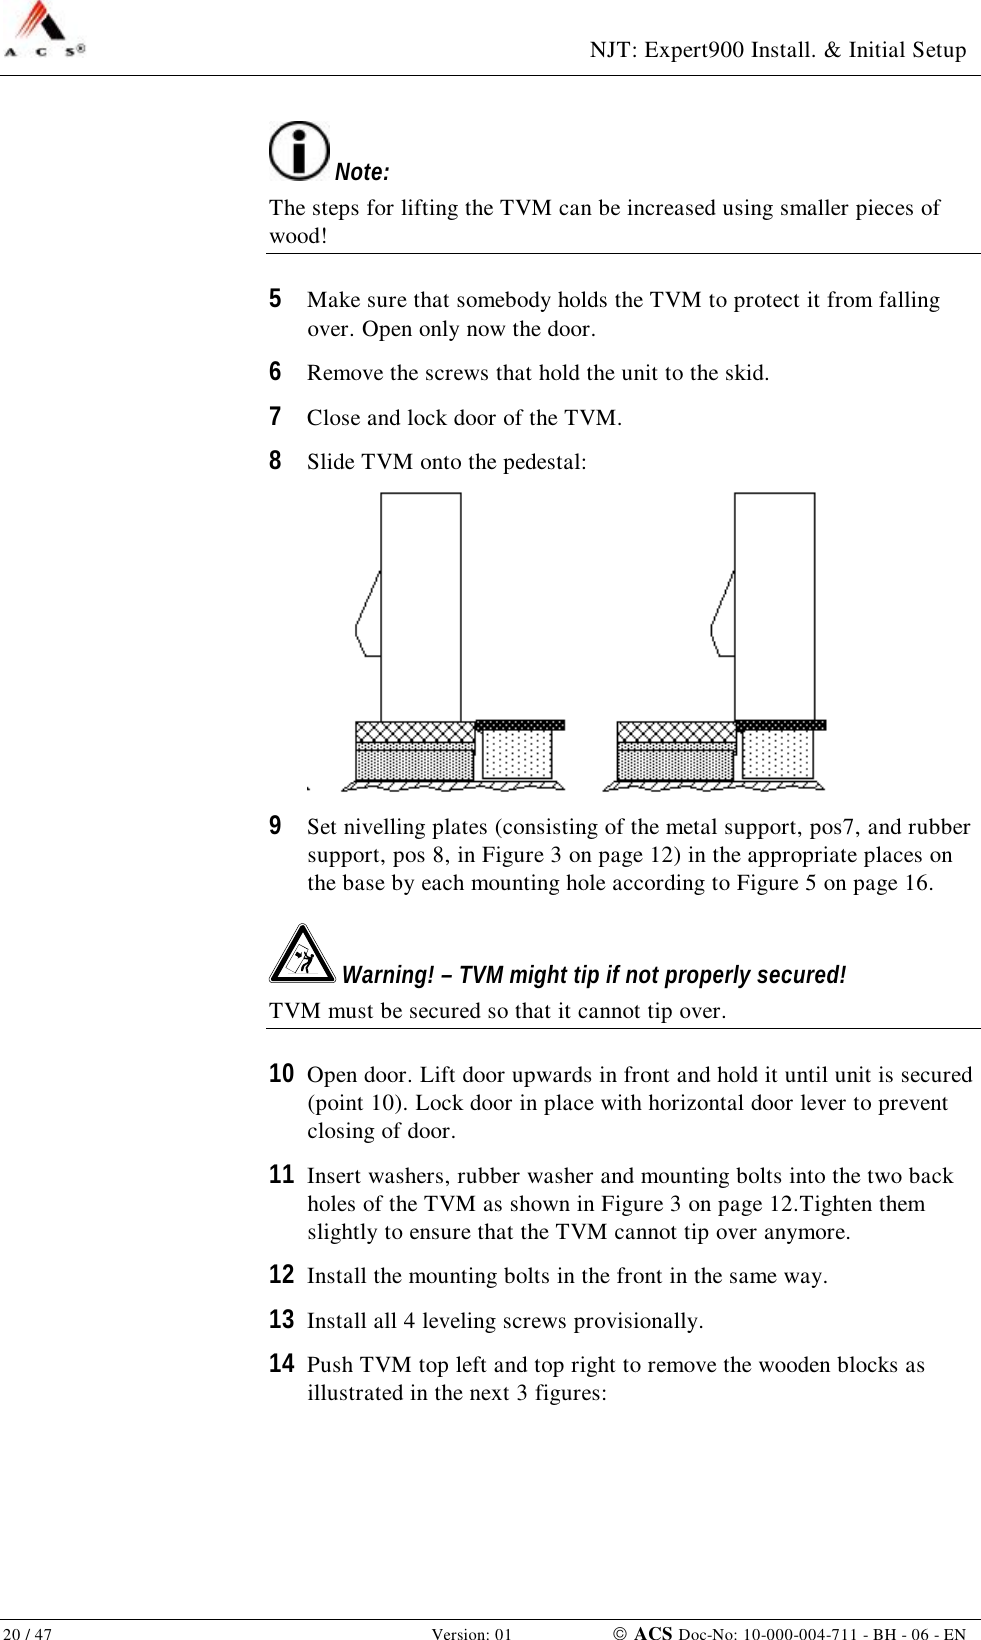  NJT: Expert900 Install. &amp; Initial Setup 20 / 47   Version: 01    ACS Doc-No: 10-000-004-711 - BH - 06 - EN  Note: The steps for lifting the TVM can be increased using smaller pieces of wood! 5  Make sure that somebody holds the TVM to protect it from falling over. Open only now the door. 6  Remove the screws that hold the unit to the skid. 7  Close and lock door of the TVM. 8  Slide TVM onto the pedestal:  9  Set nivelling plates (consisting of the metal support, pos7, and rubber support, pos 8, in Figure 3 on page 12) in the appropriate places on the base by each mounting hole according to Figure 5 on page 16.  Warning! – TVM might tip if not properly secured! TVM must be secured so that it cannot tip over. 10  Open door. Lift door upwards in front and hold it until unit is secured (point 10). Lock door in place with horizontal door lever to prevent closing of door. 11  Insert washers, rubber washer and mounting bolts into the two back holes of the TVM as shown in Figure 3 on page 12.Tighten them slightly to ensure that the TVM cannot tip over anymore. 12  Install the mounting bolts in the front in the same way. 13  Install all 4 leveling screws provisionally. 14  Push TVM top left and top right to remove the wooden blocks as illustrated in the next 3 figures: 